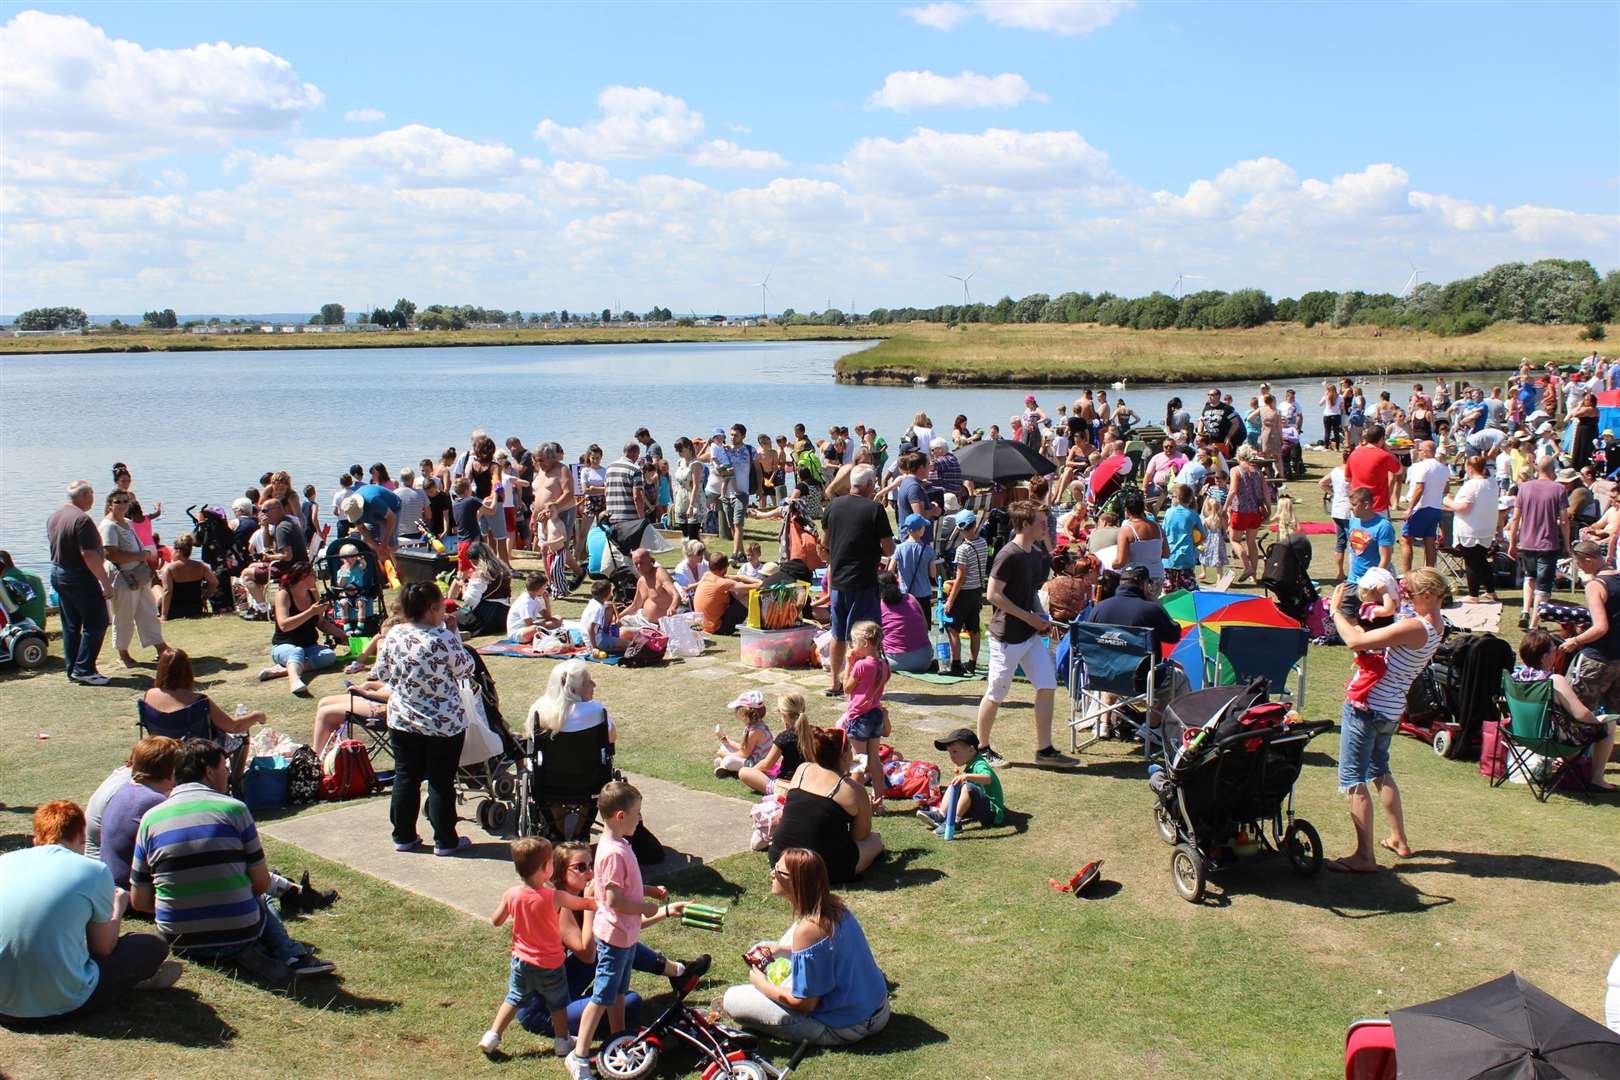 Typical crowd for the Sheppey Pirates' landing and water fight at Barton's Point Coastal Park (2342875)